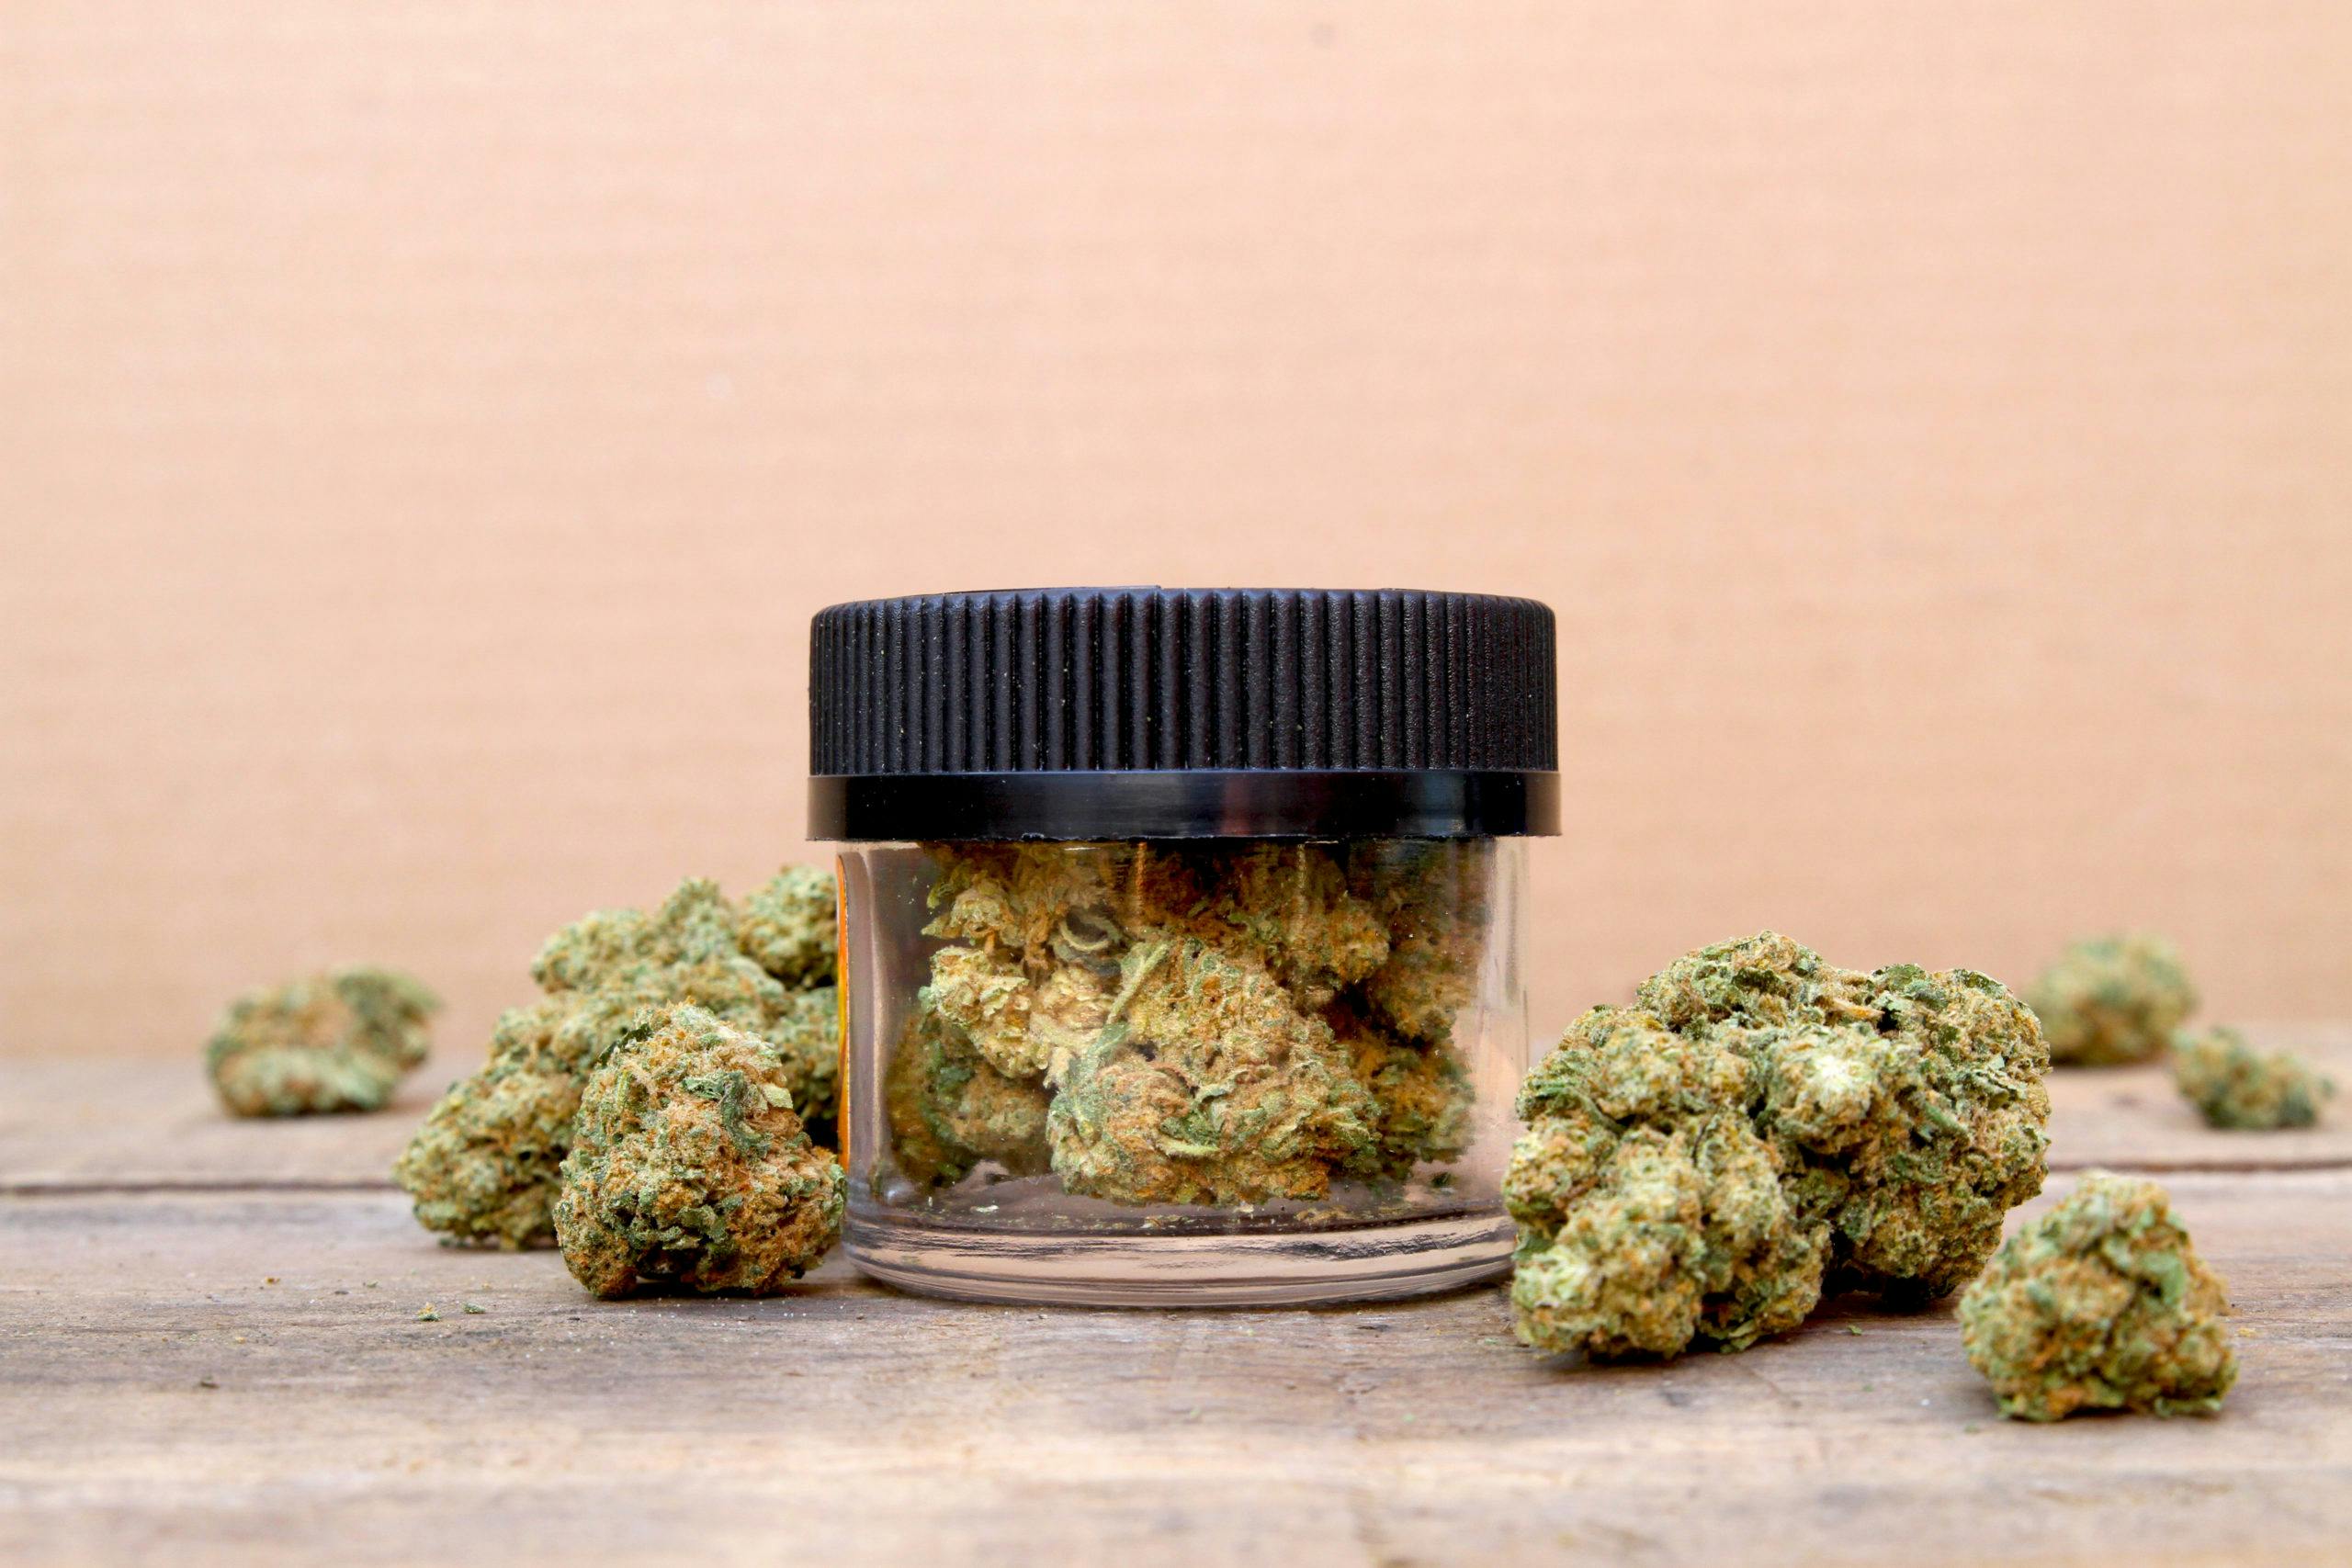 Illicit Cannabis in Jar Surrounded by Buds on Table (Green Crack, Sativ